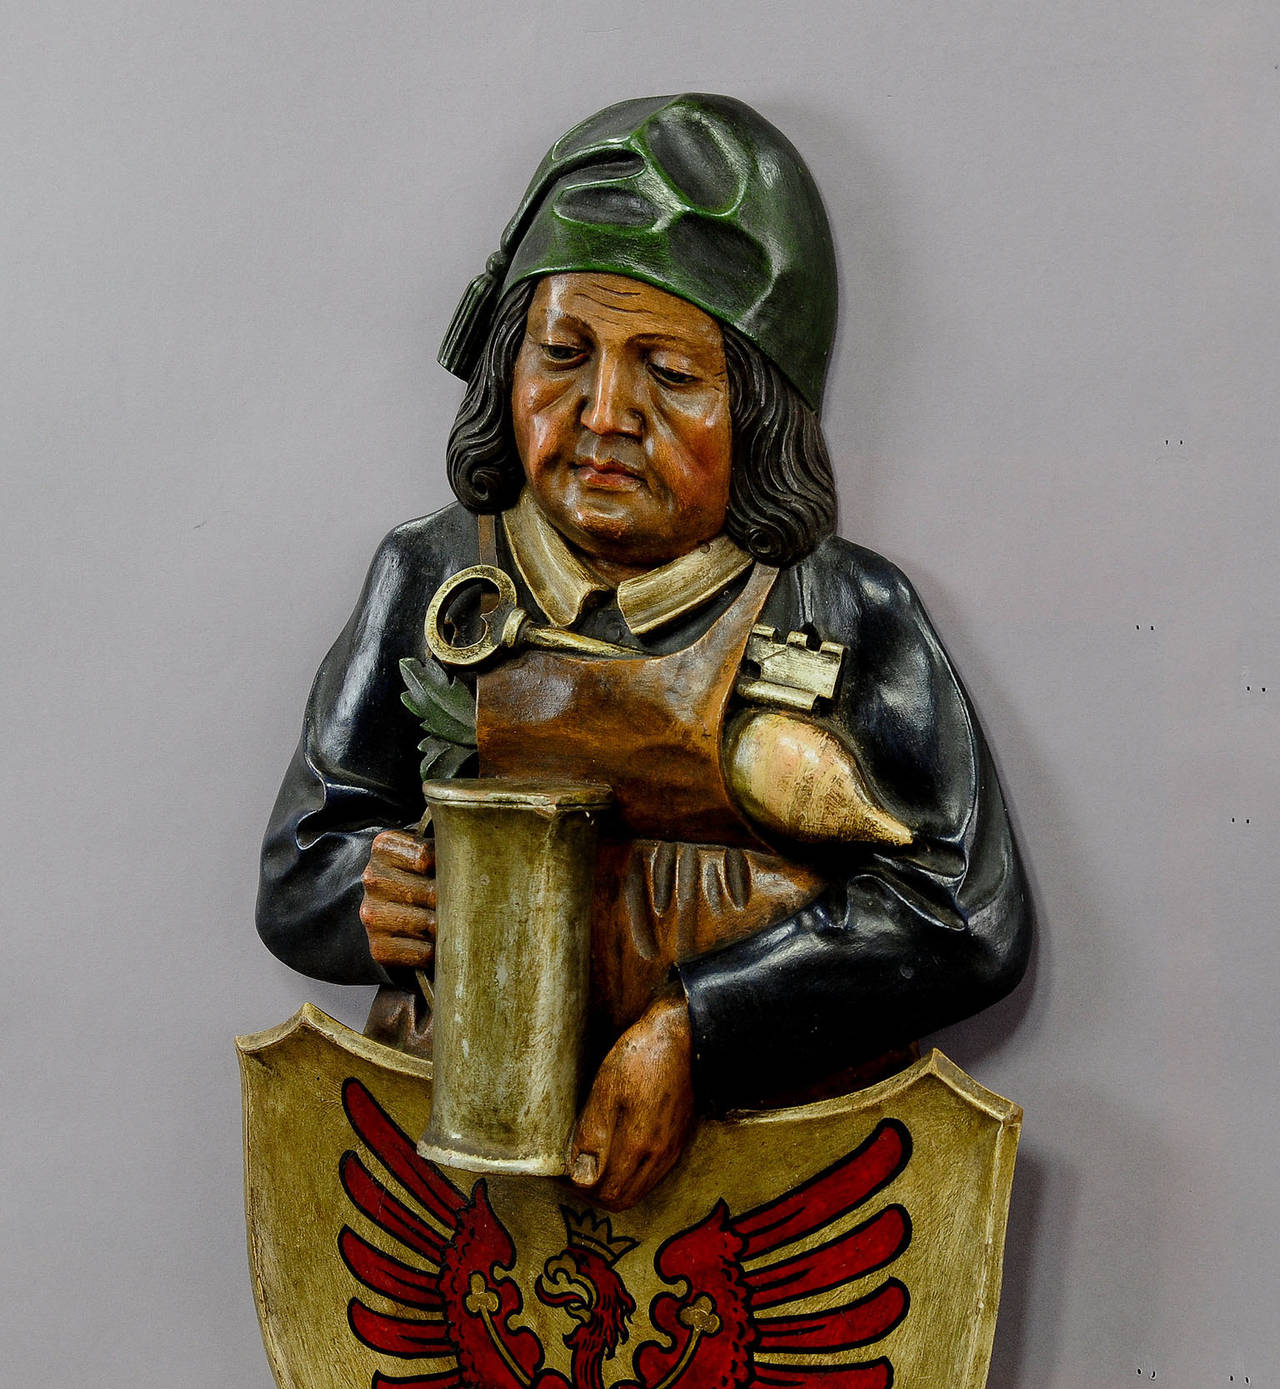 A great hand-carved and painted wall plaque of a cellarer holding a beer mug, gilded shield with red eagle, the heraldig crest of the state Brandenburg in Germany, executed circa 1920.